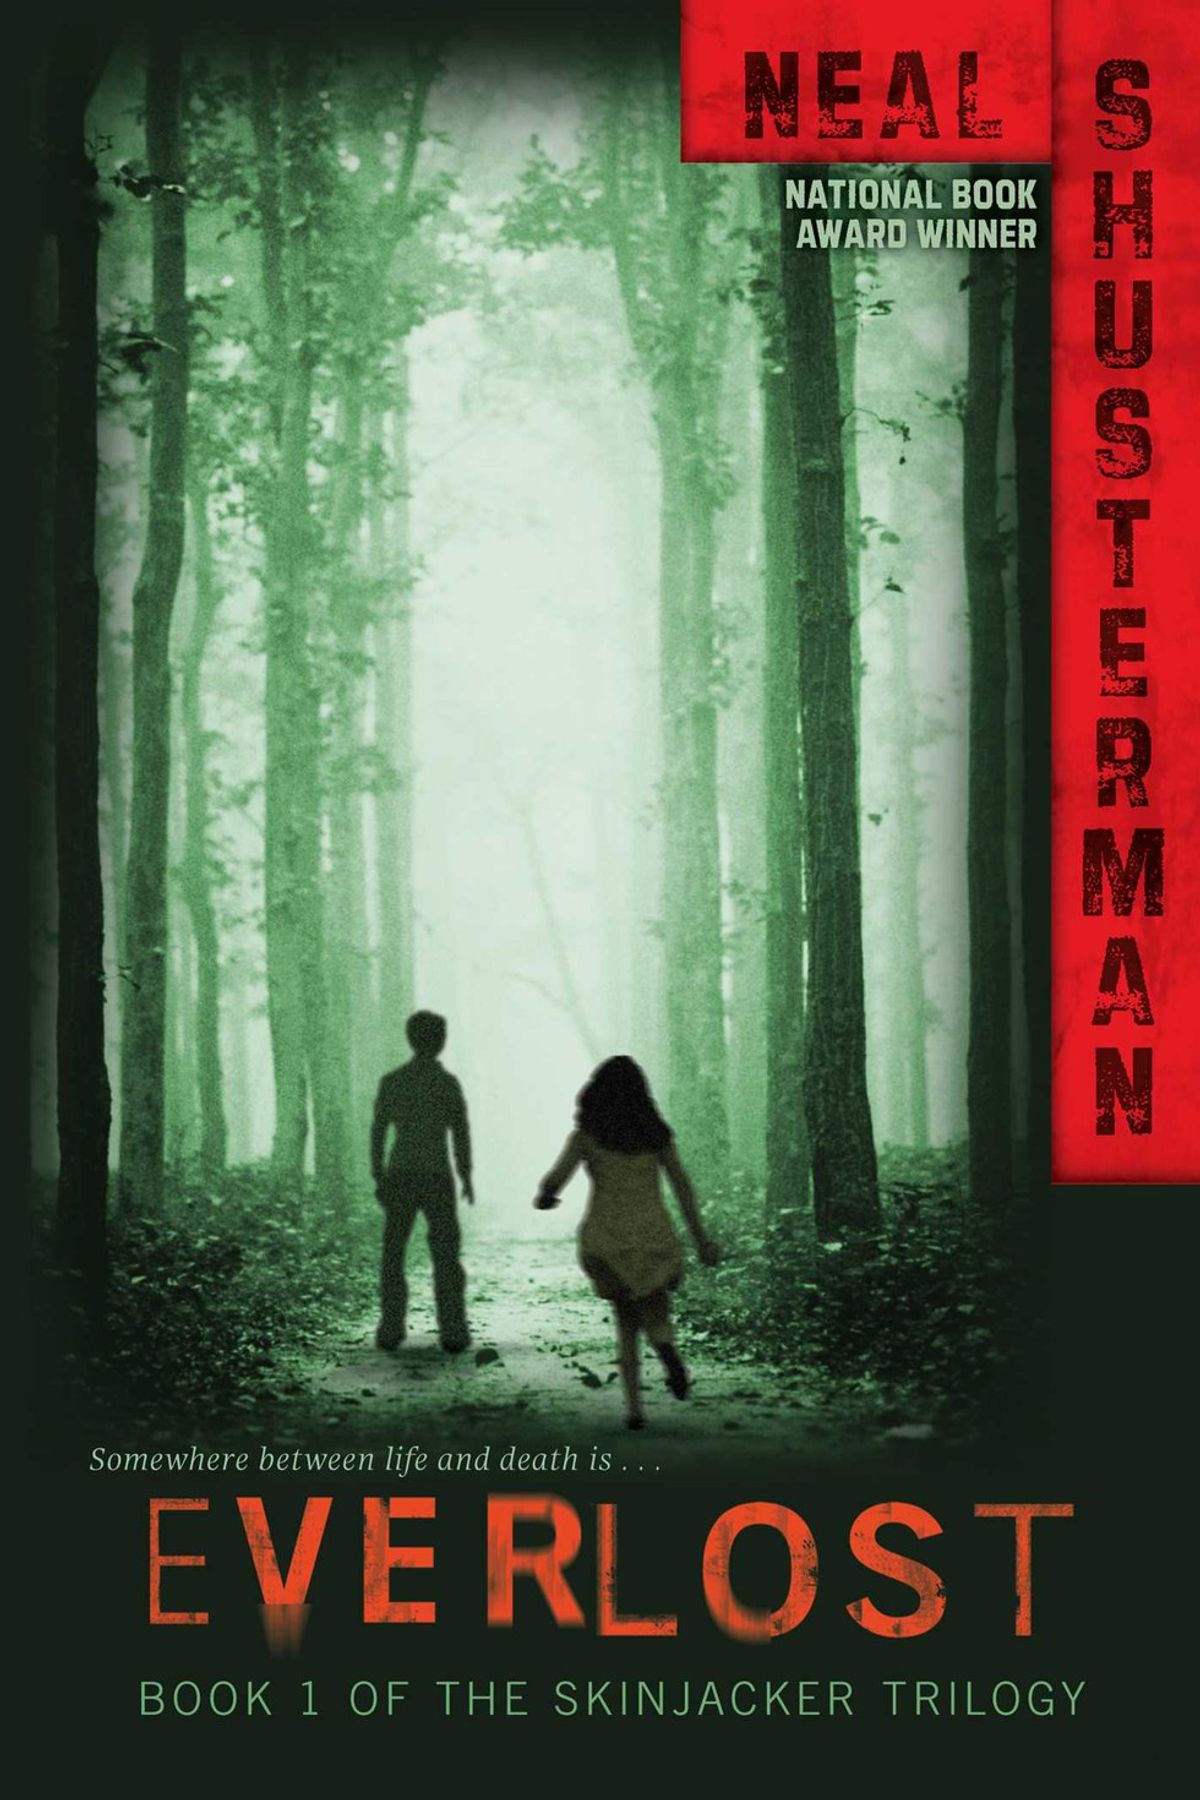 Book Review: The Skinjacker Trilogy by Neal Shusterman